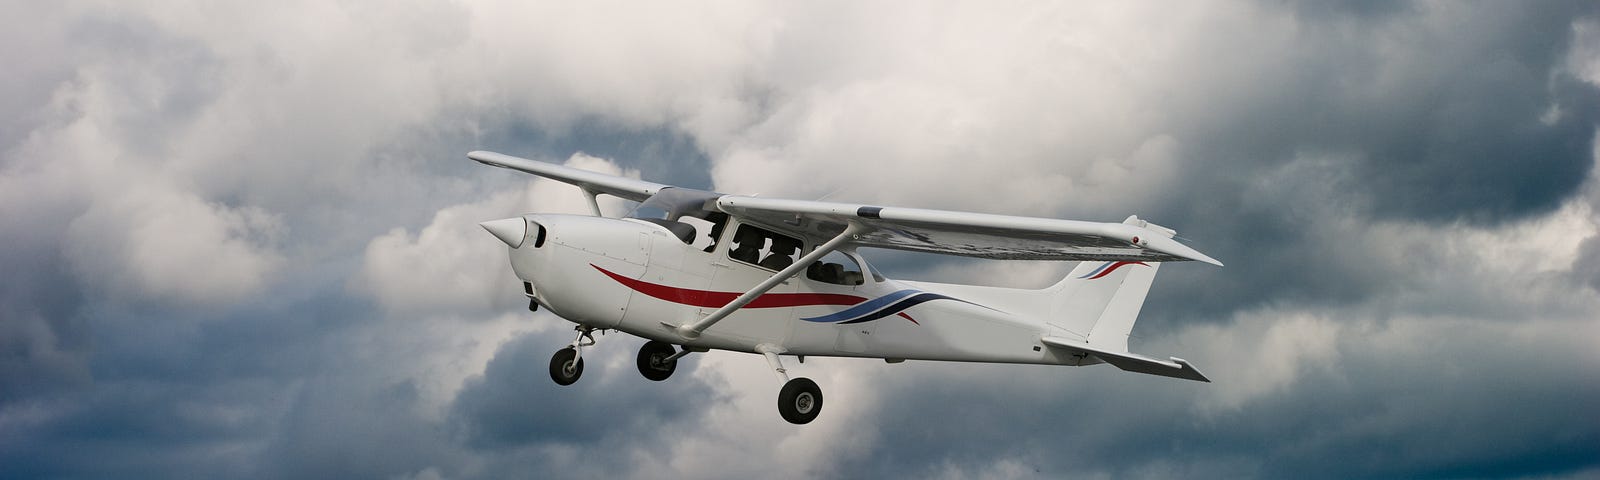 Stock image of a Cessna in flight.